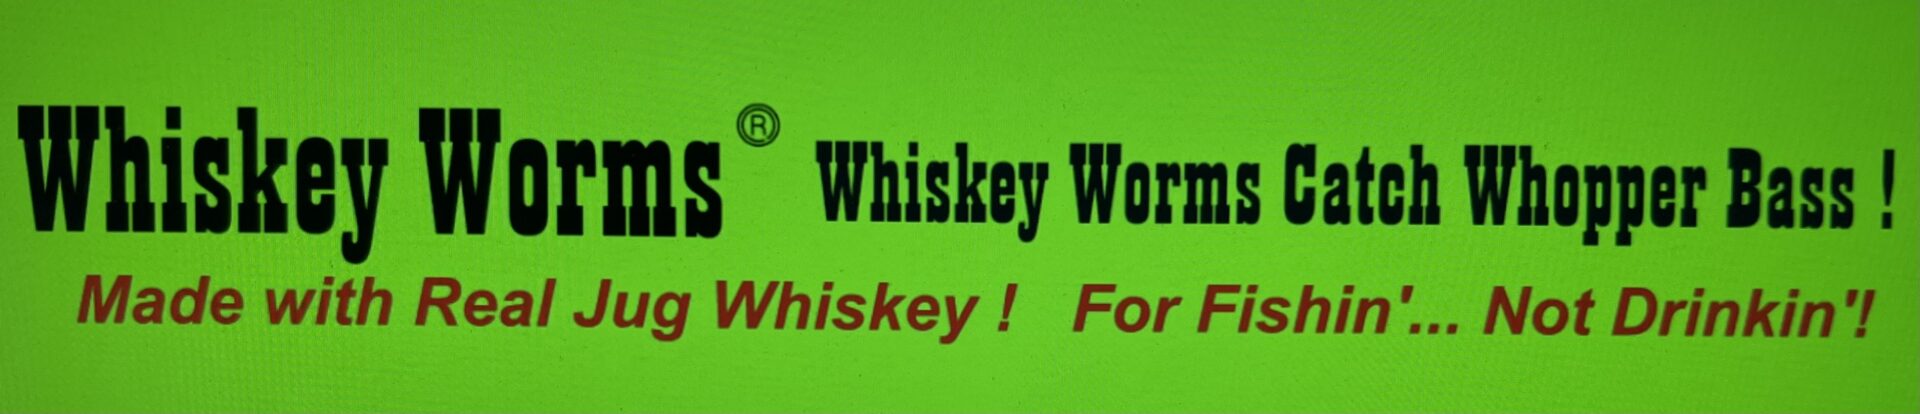 whiskey worms label banner-0001